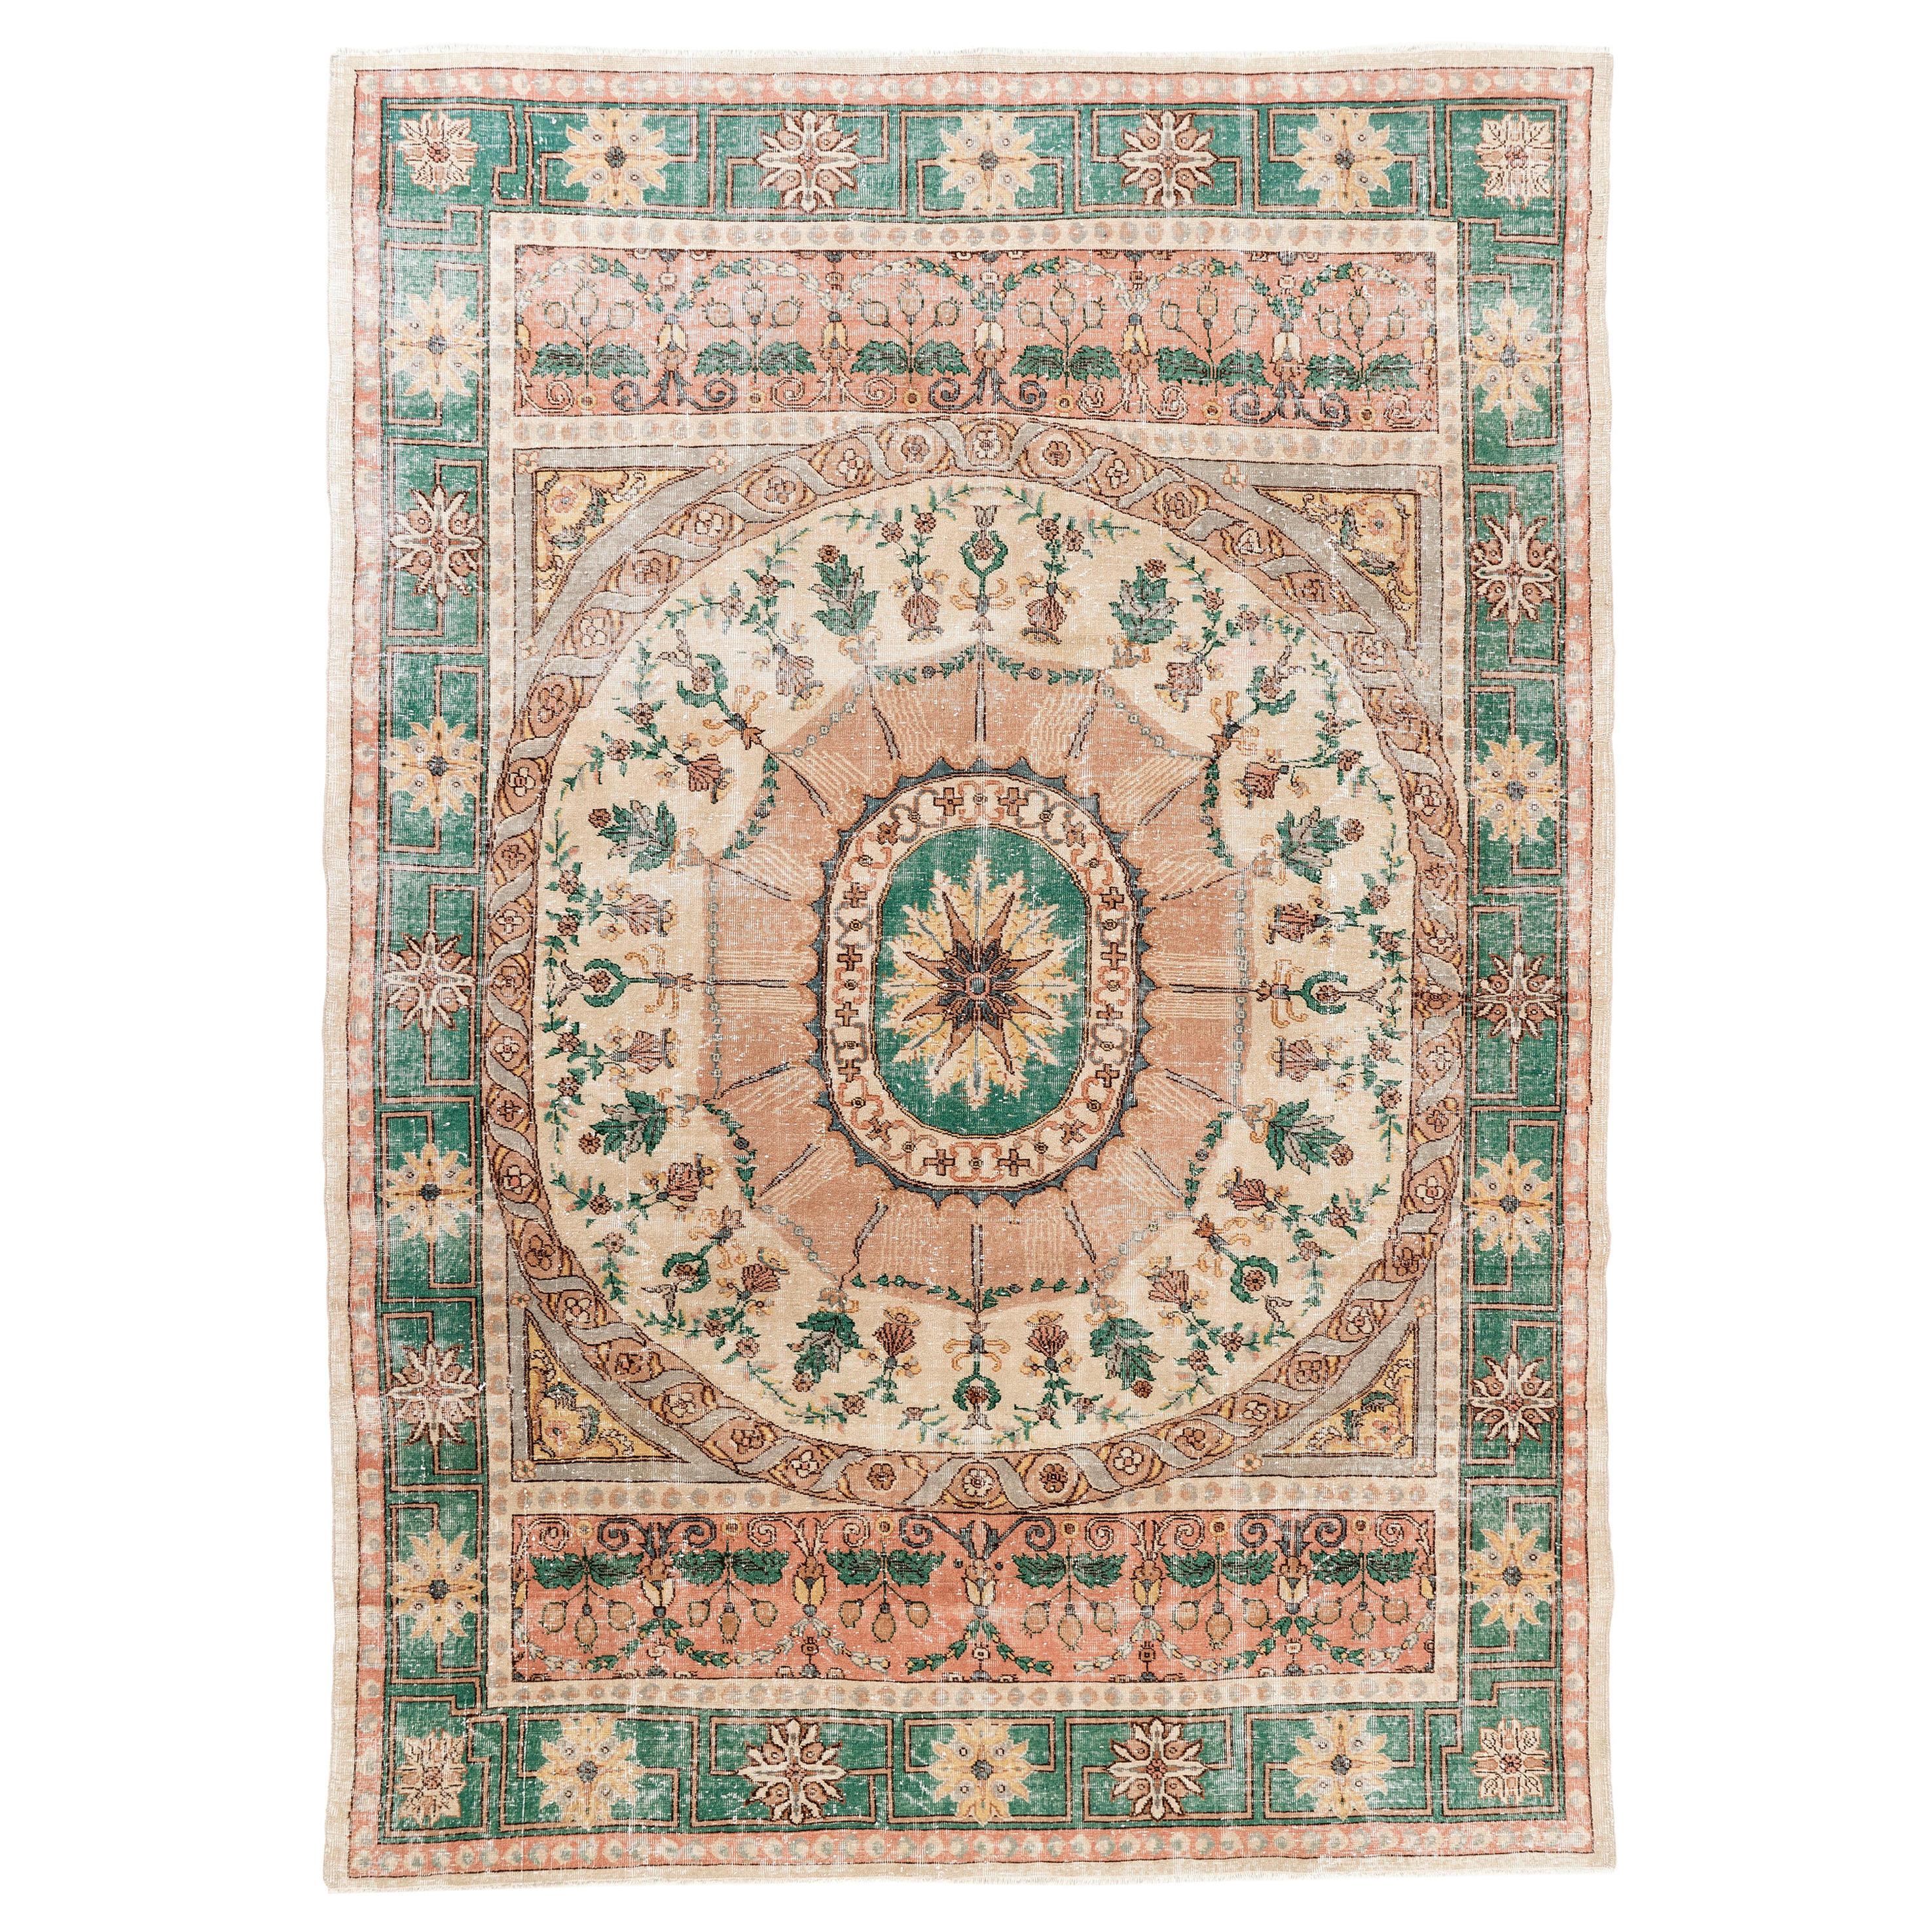 8.4x12 Ft Unusual Vintage Hand Knotted European Rug. French Design Wool Carpet For Sale